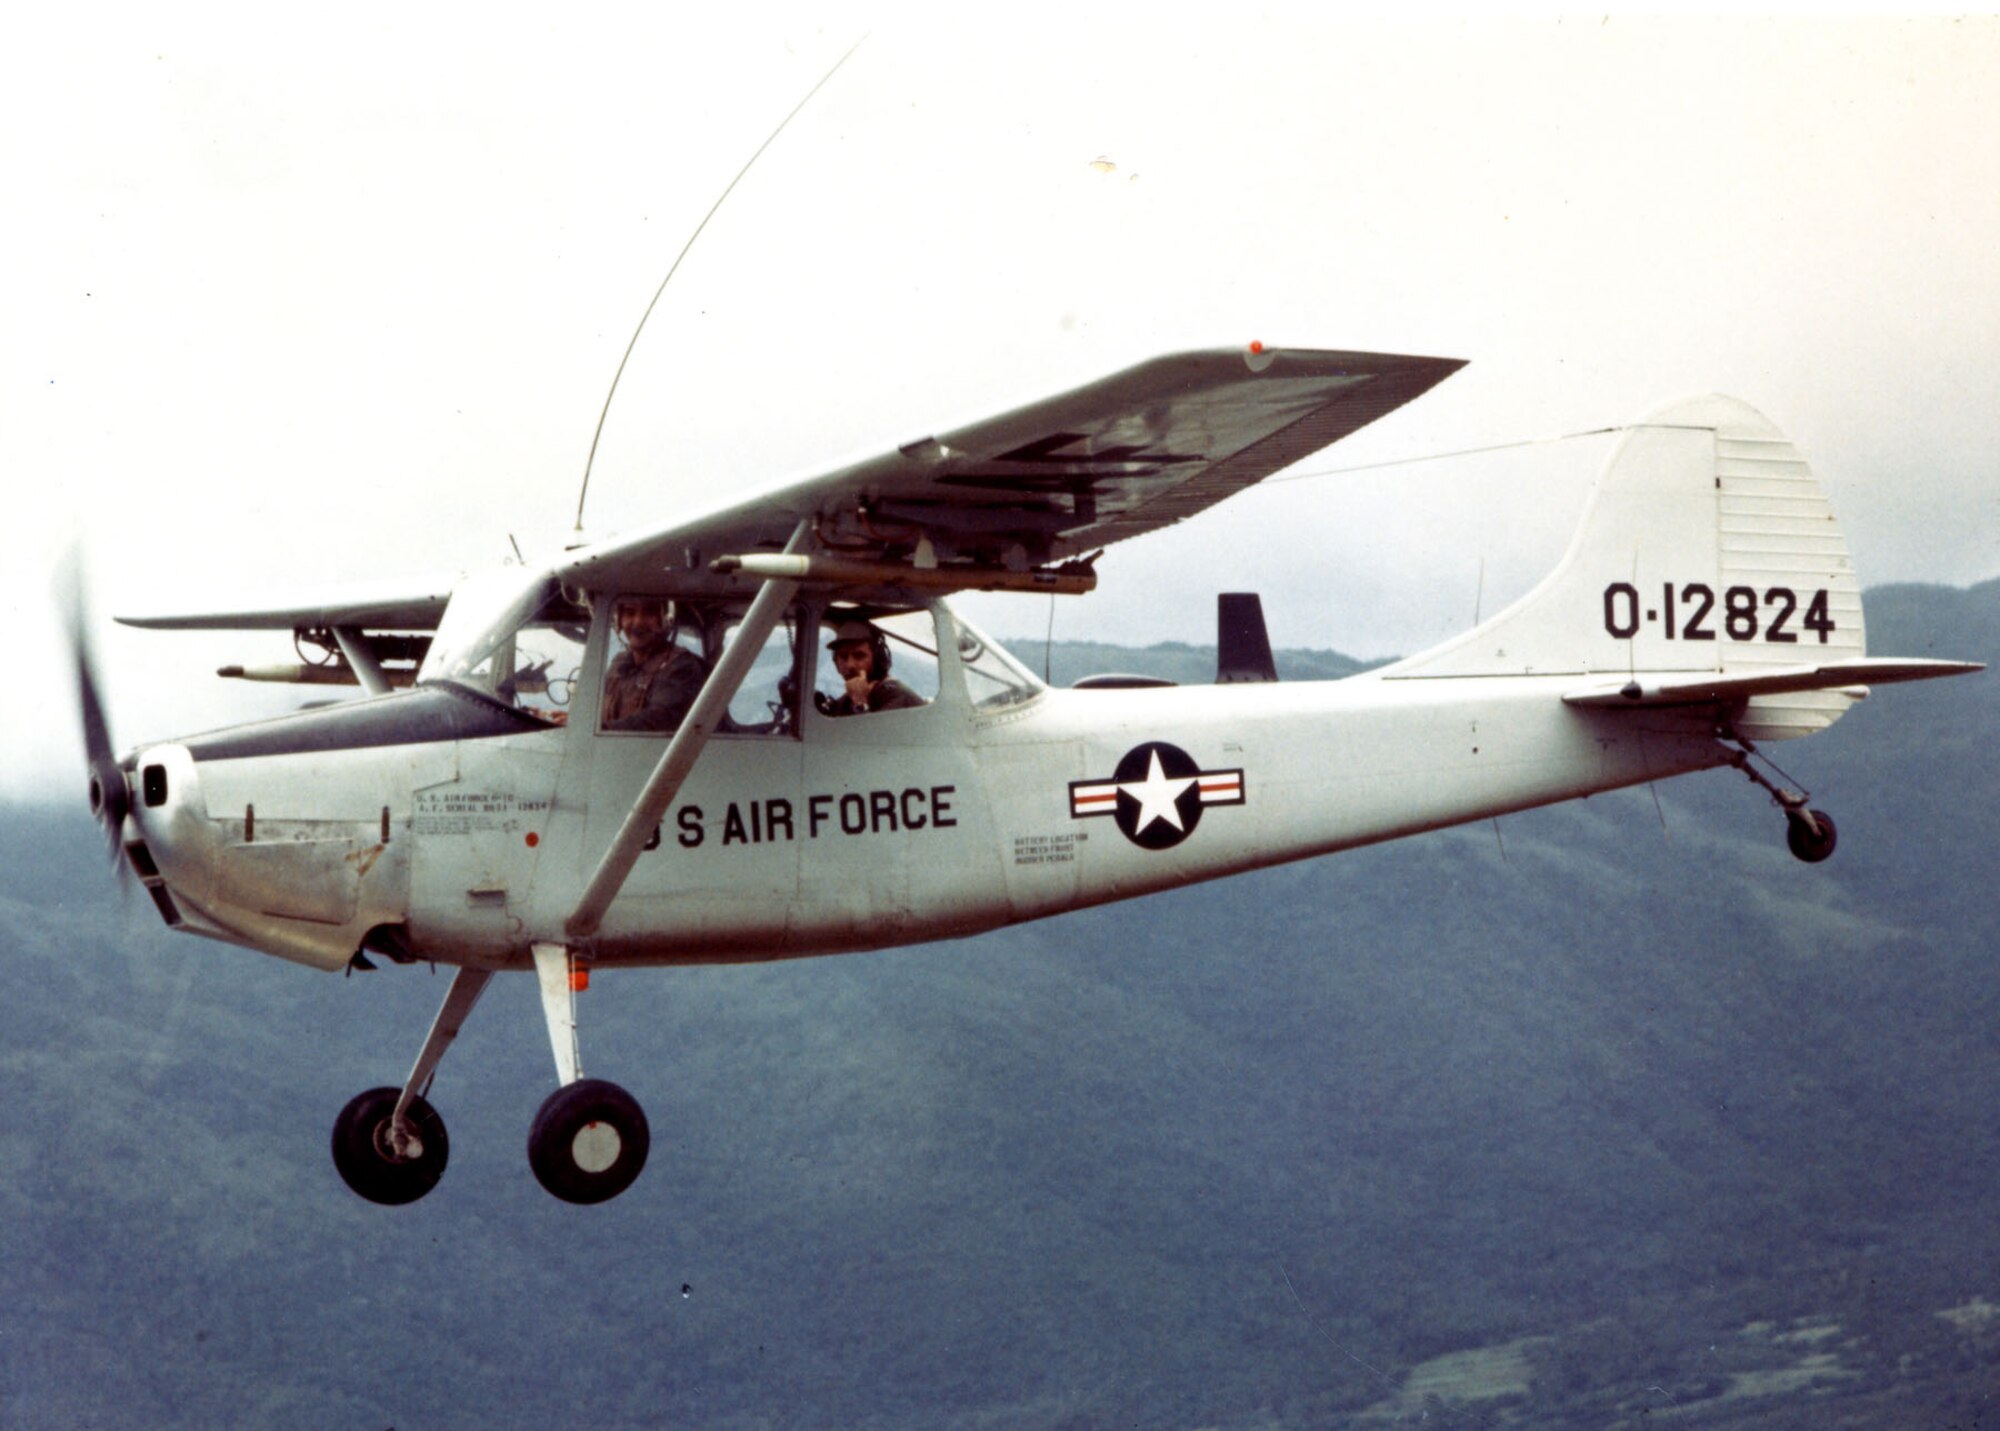 The limited ability of the Cessna O-1 Bird Dog to carry weapons convinced the Air Force to seek a replacement FAC aircraft. (U.S. Air Force photo)